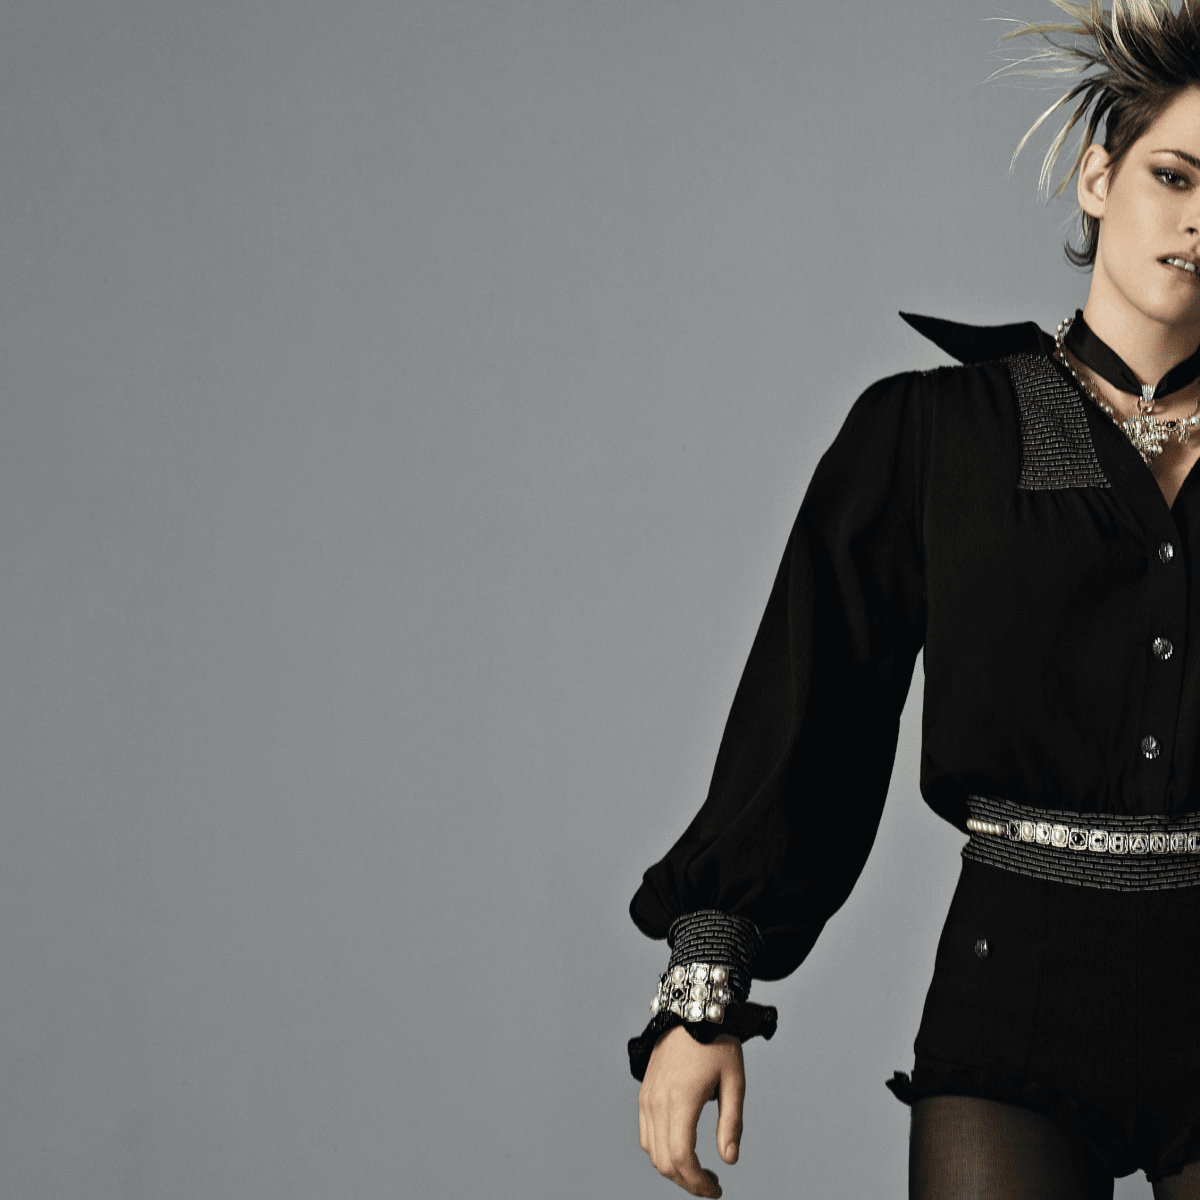 Kristen Stewart Gives Us Another Lesson in Cool for Chanel's